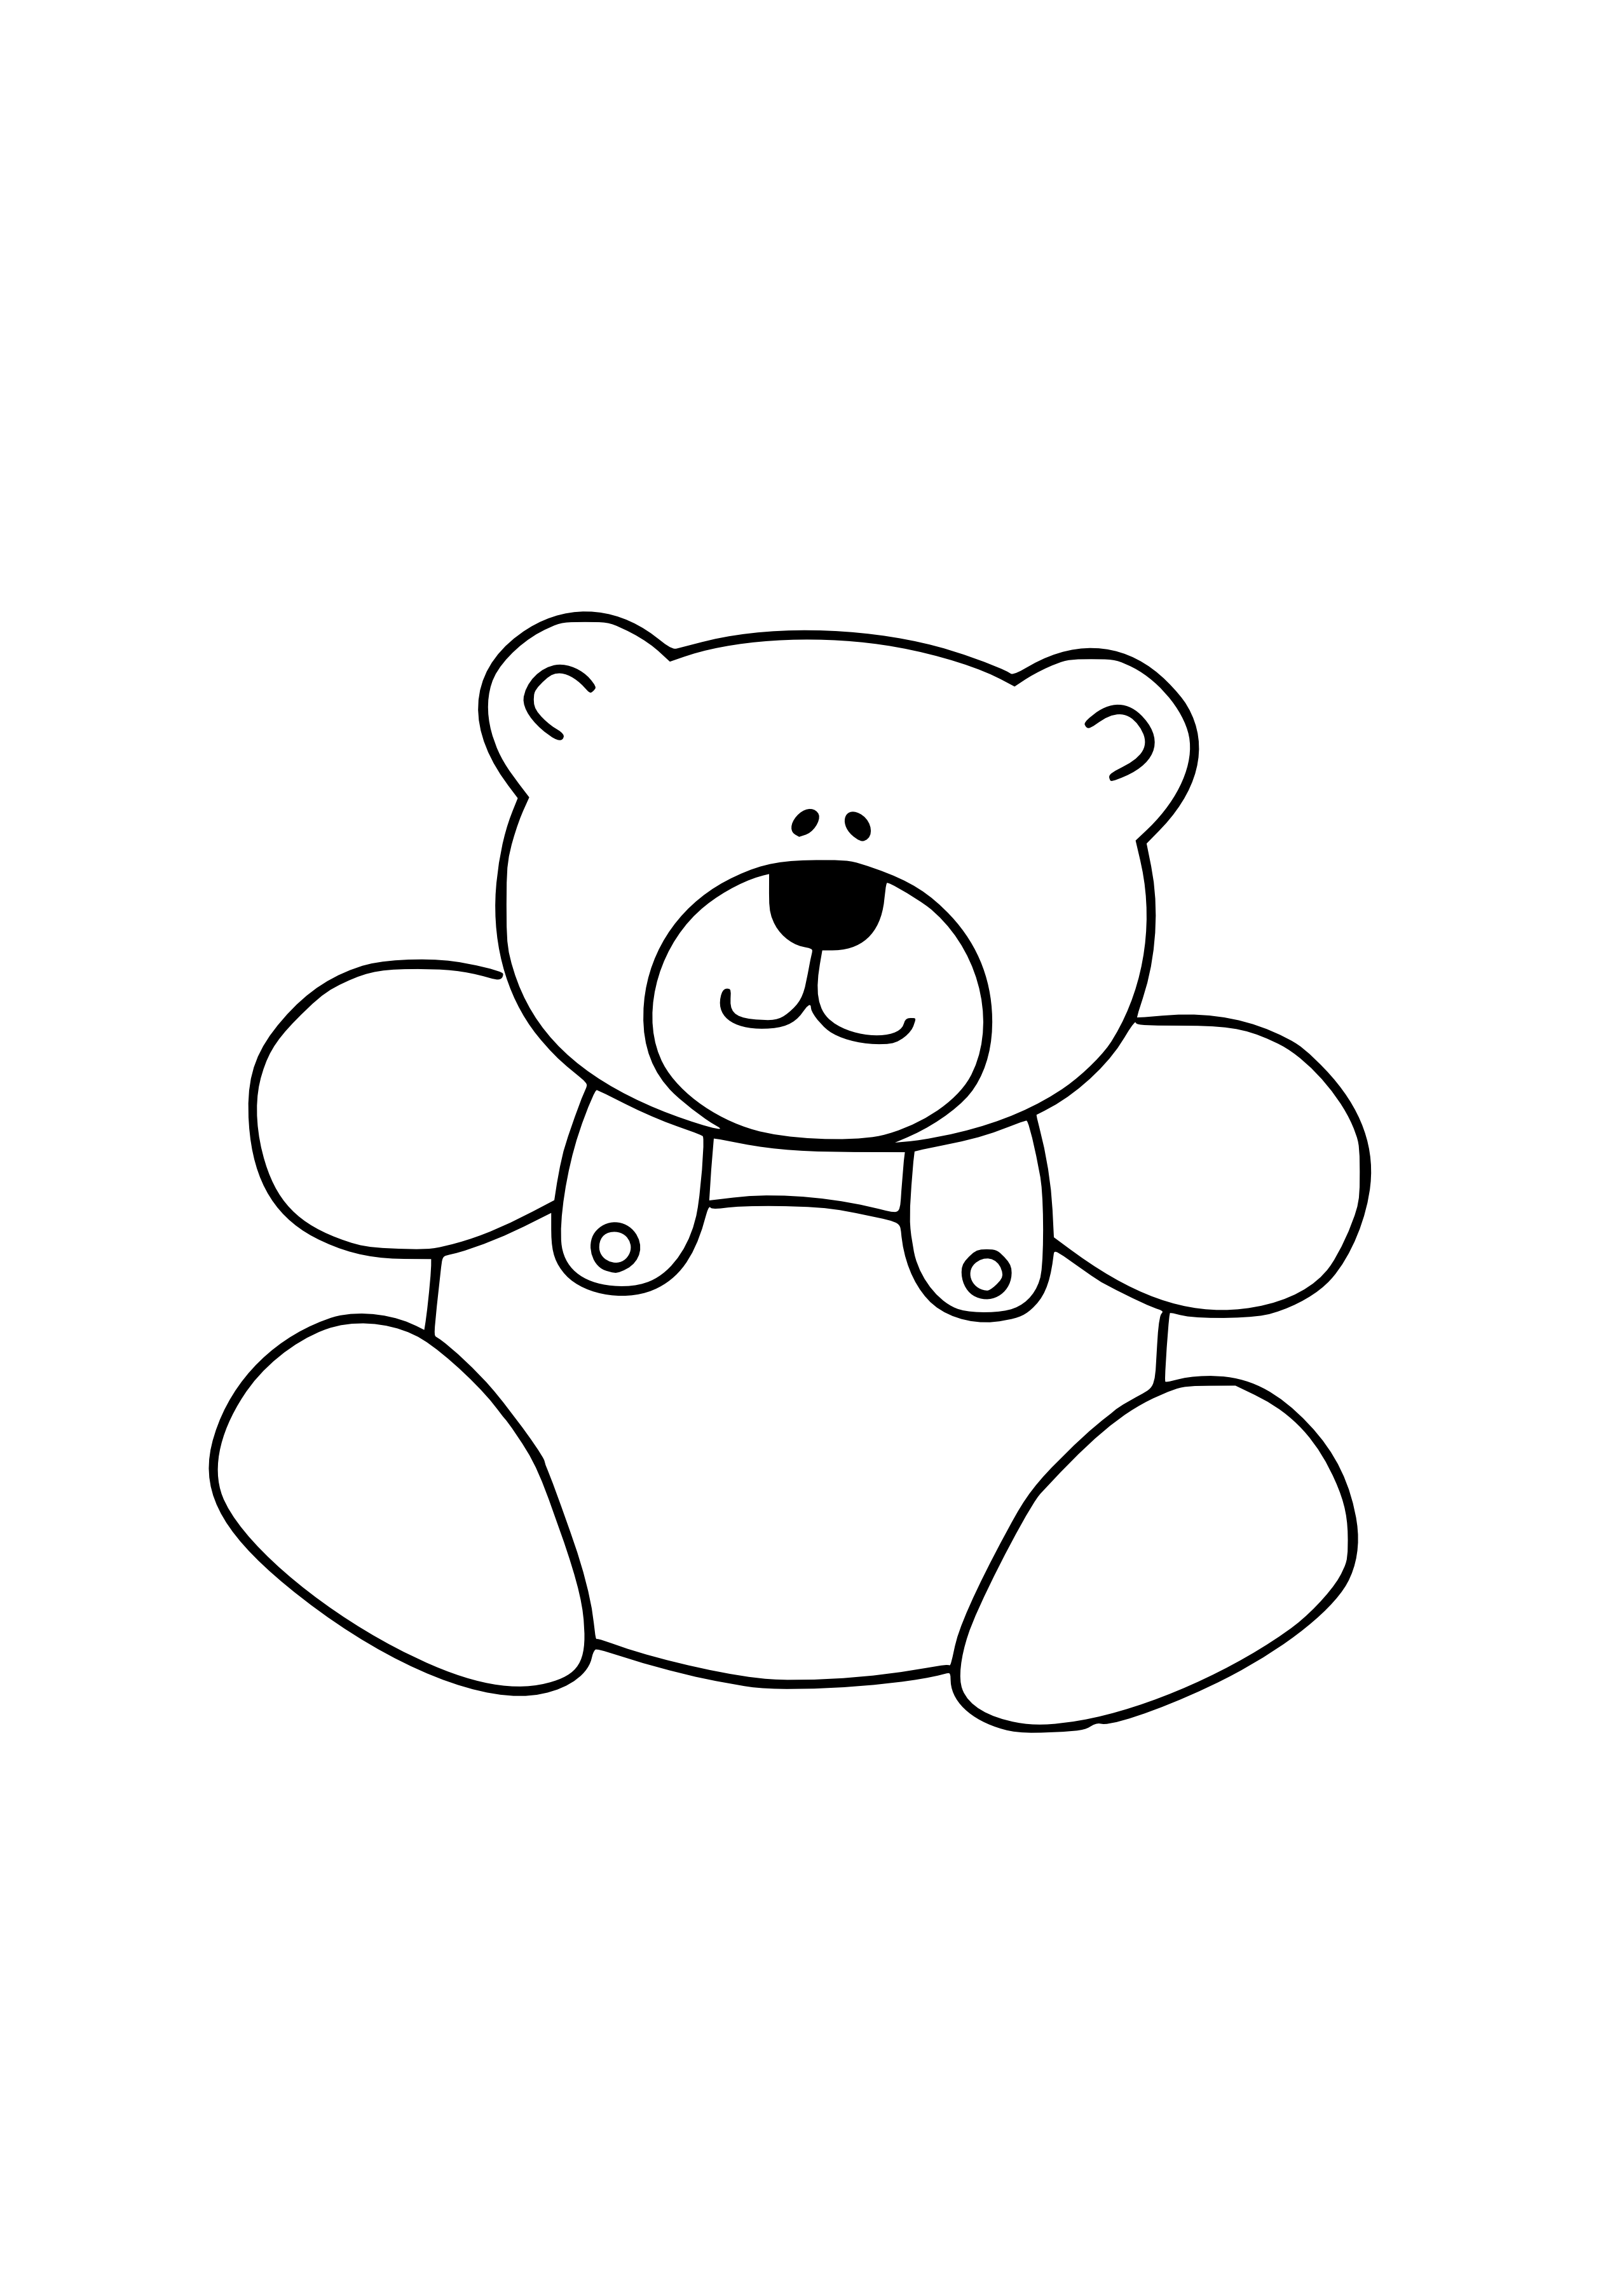 free-teddy-bear-outline-download-free-teddy-bear-outline-png-images-free-cliparts-on-clipart